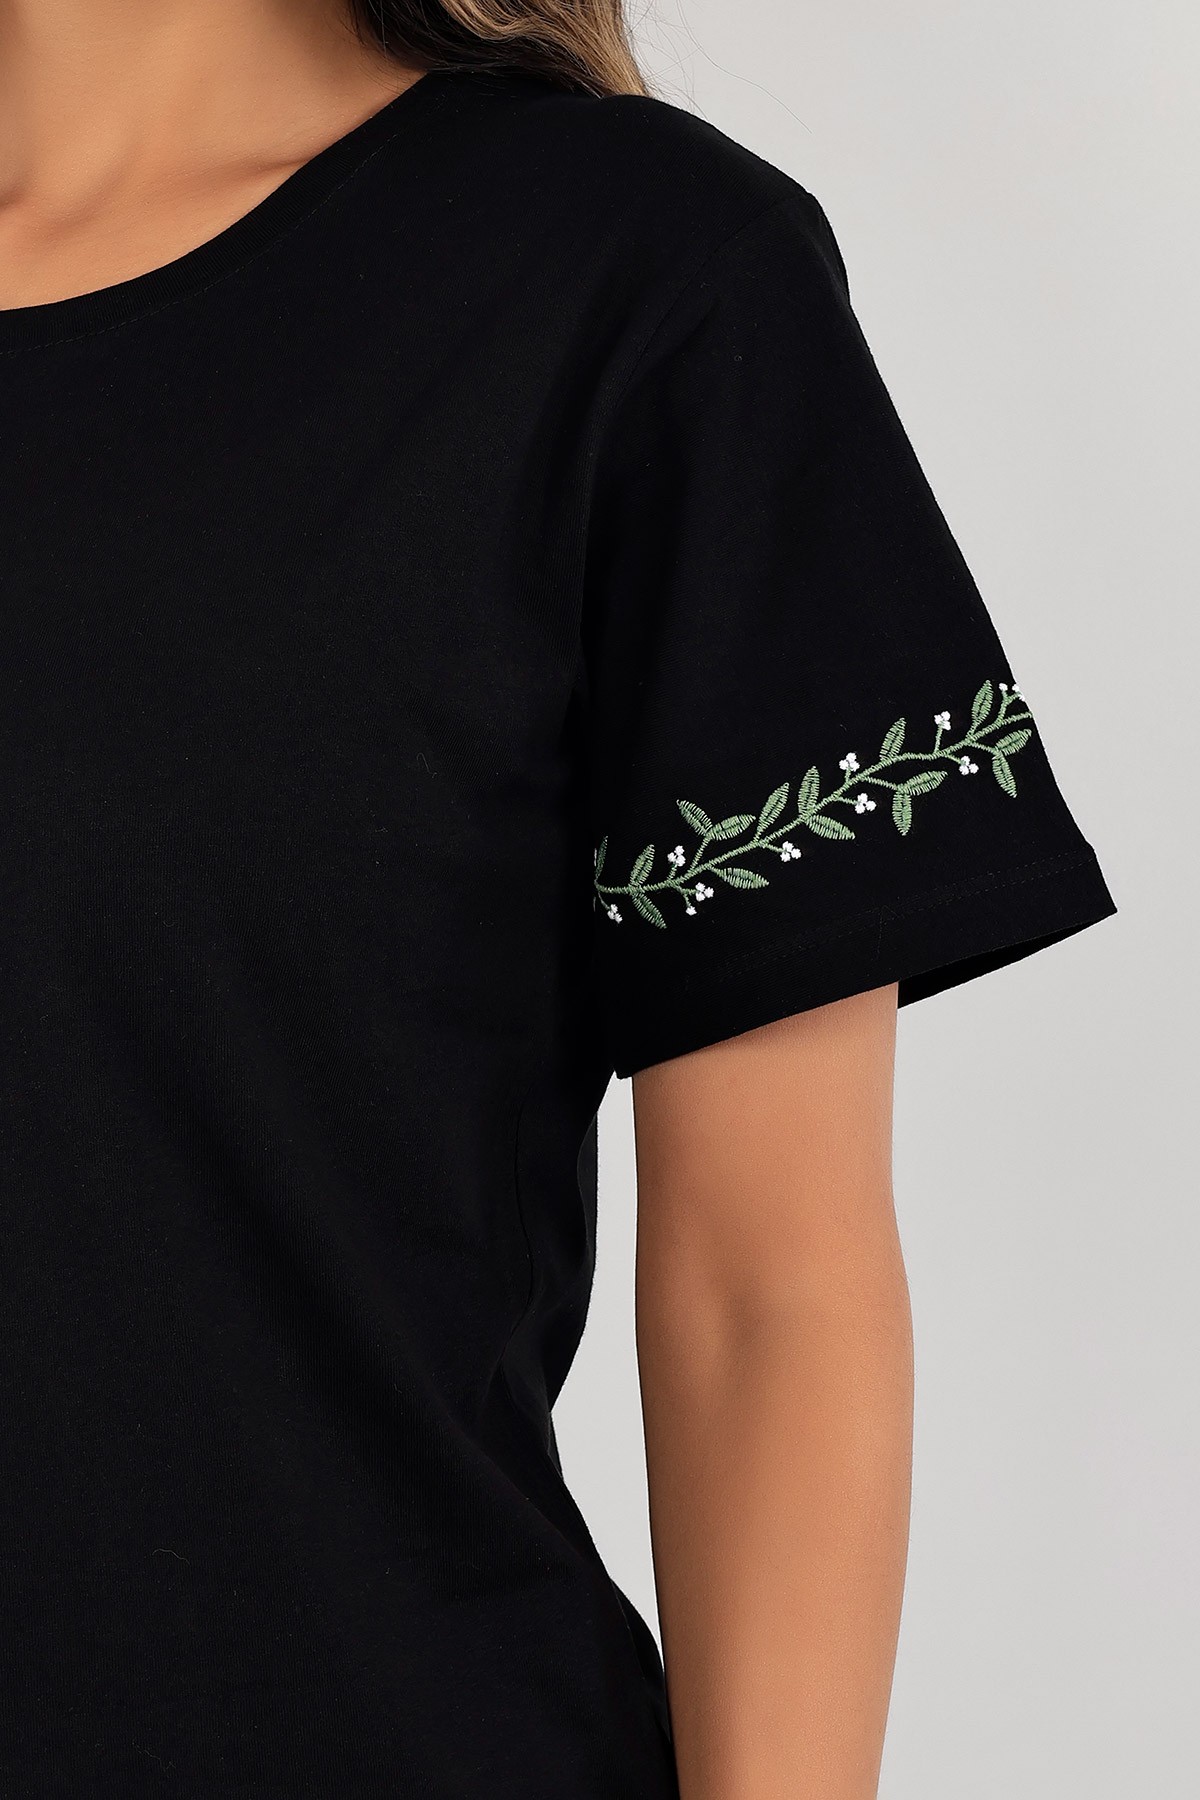 Women's black embroidered T-shirt